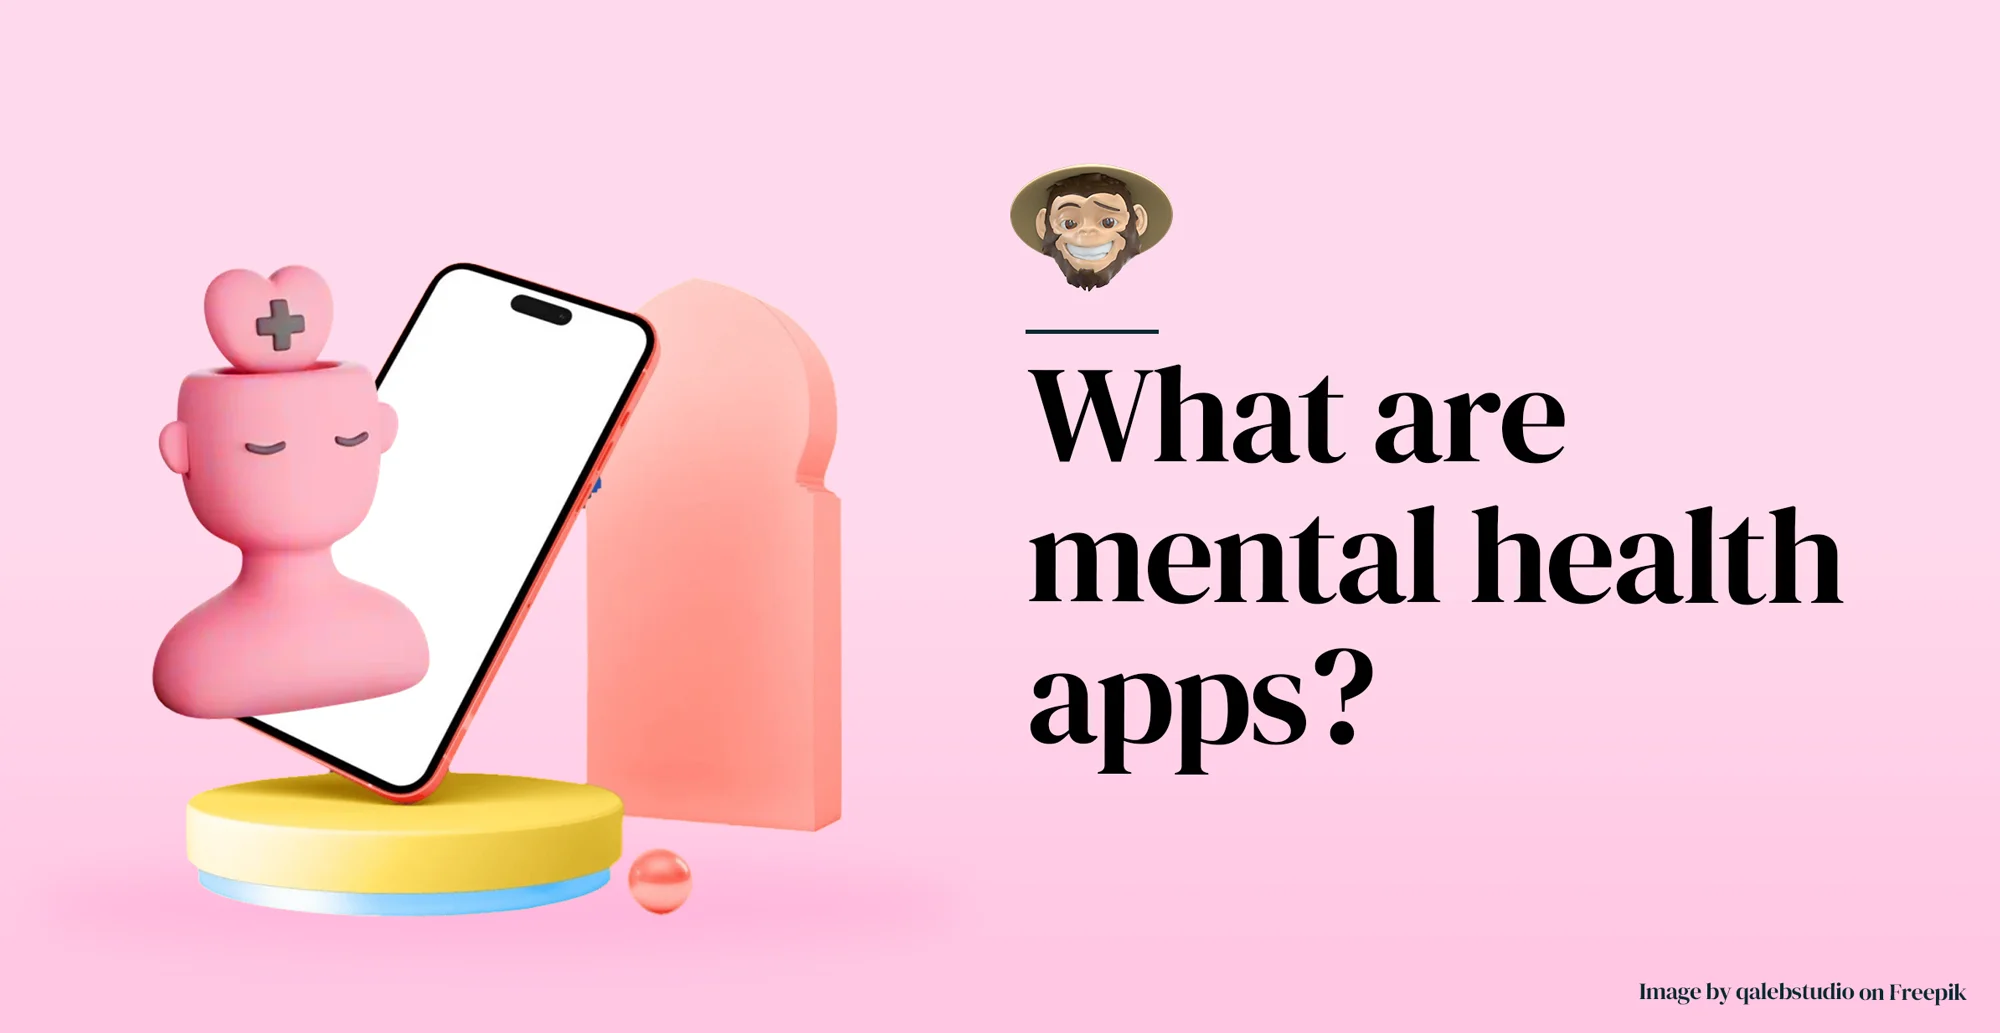 What are mental health apps?